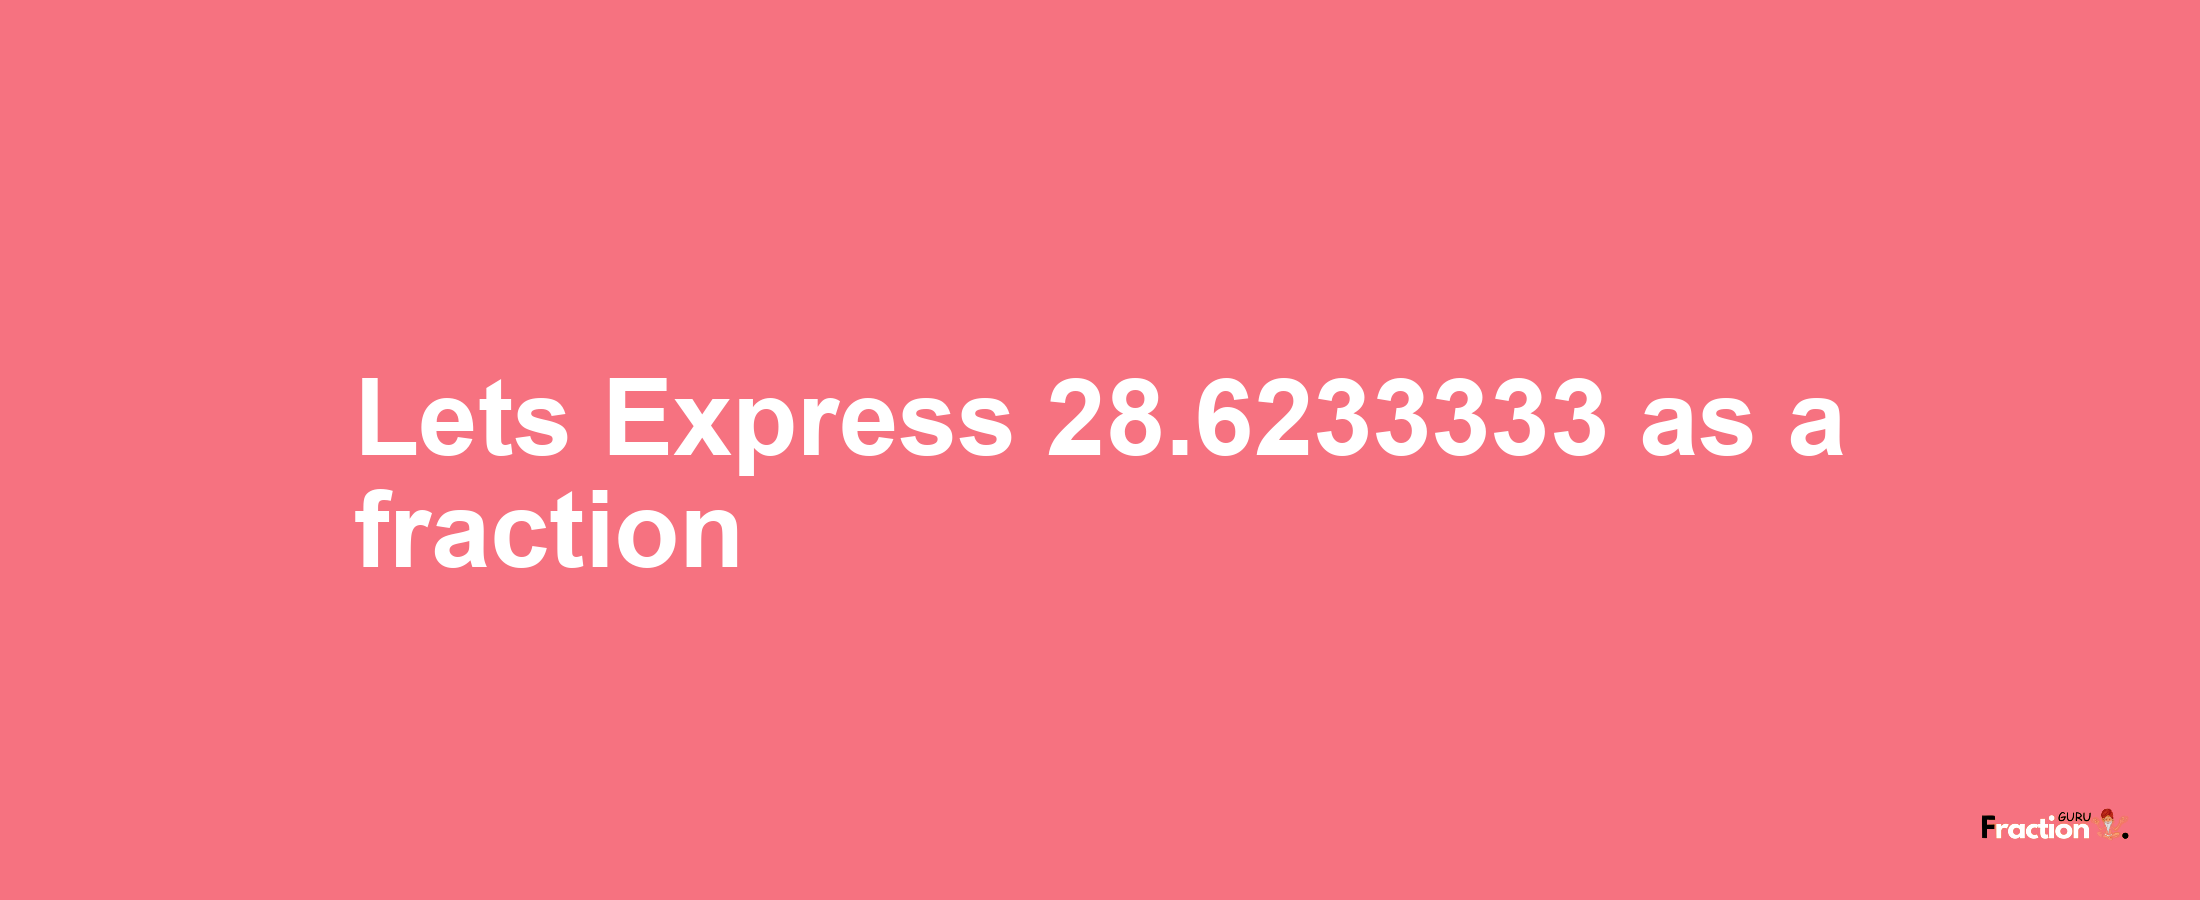 Lets Express 28.6233333 as afraction